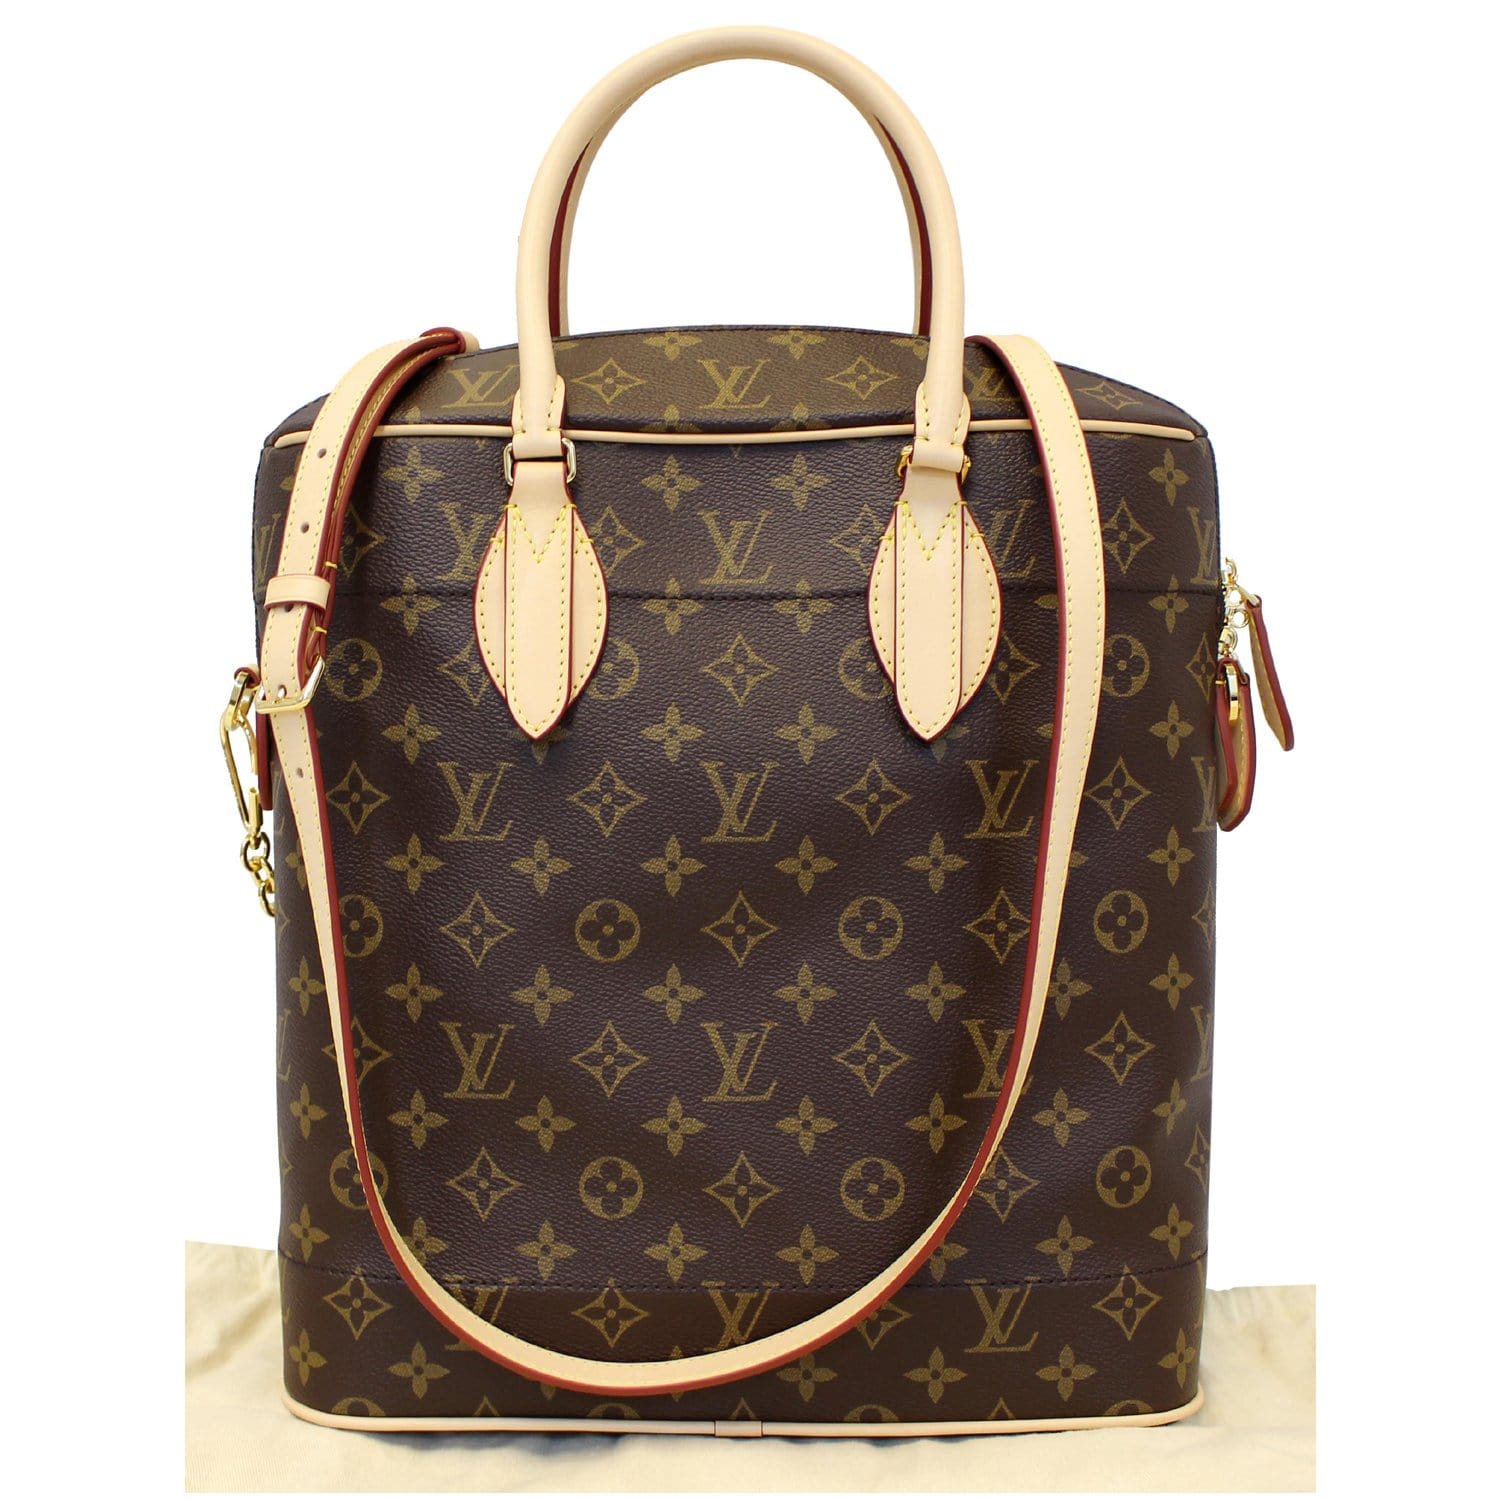 LOUIS VUITTON CARRY ALL PM PROS AND CONS  INVEST IN HAND BAGS YOU LOVE   LV LOOP GM HANDBAG PRICE  YouTube